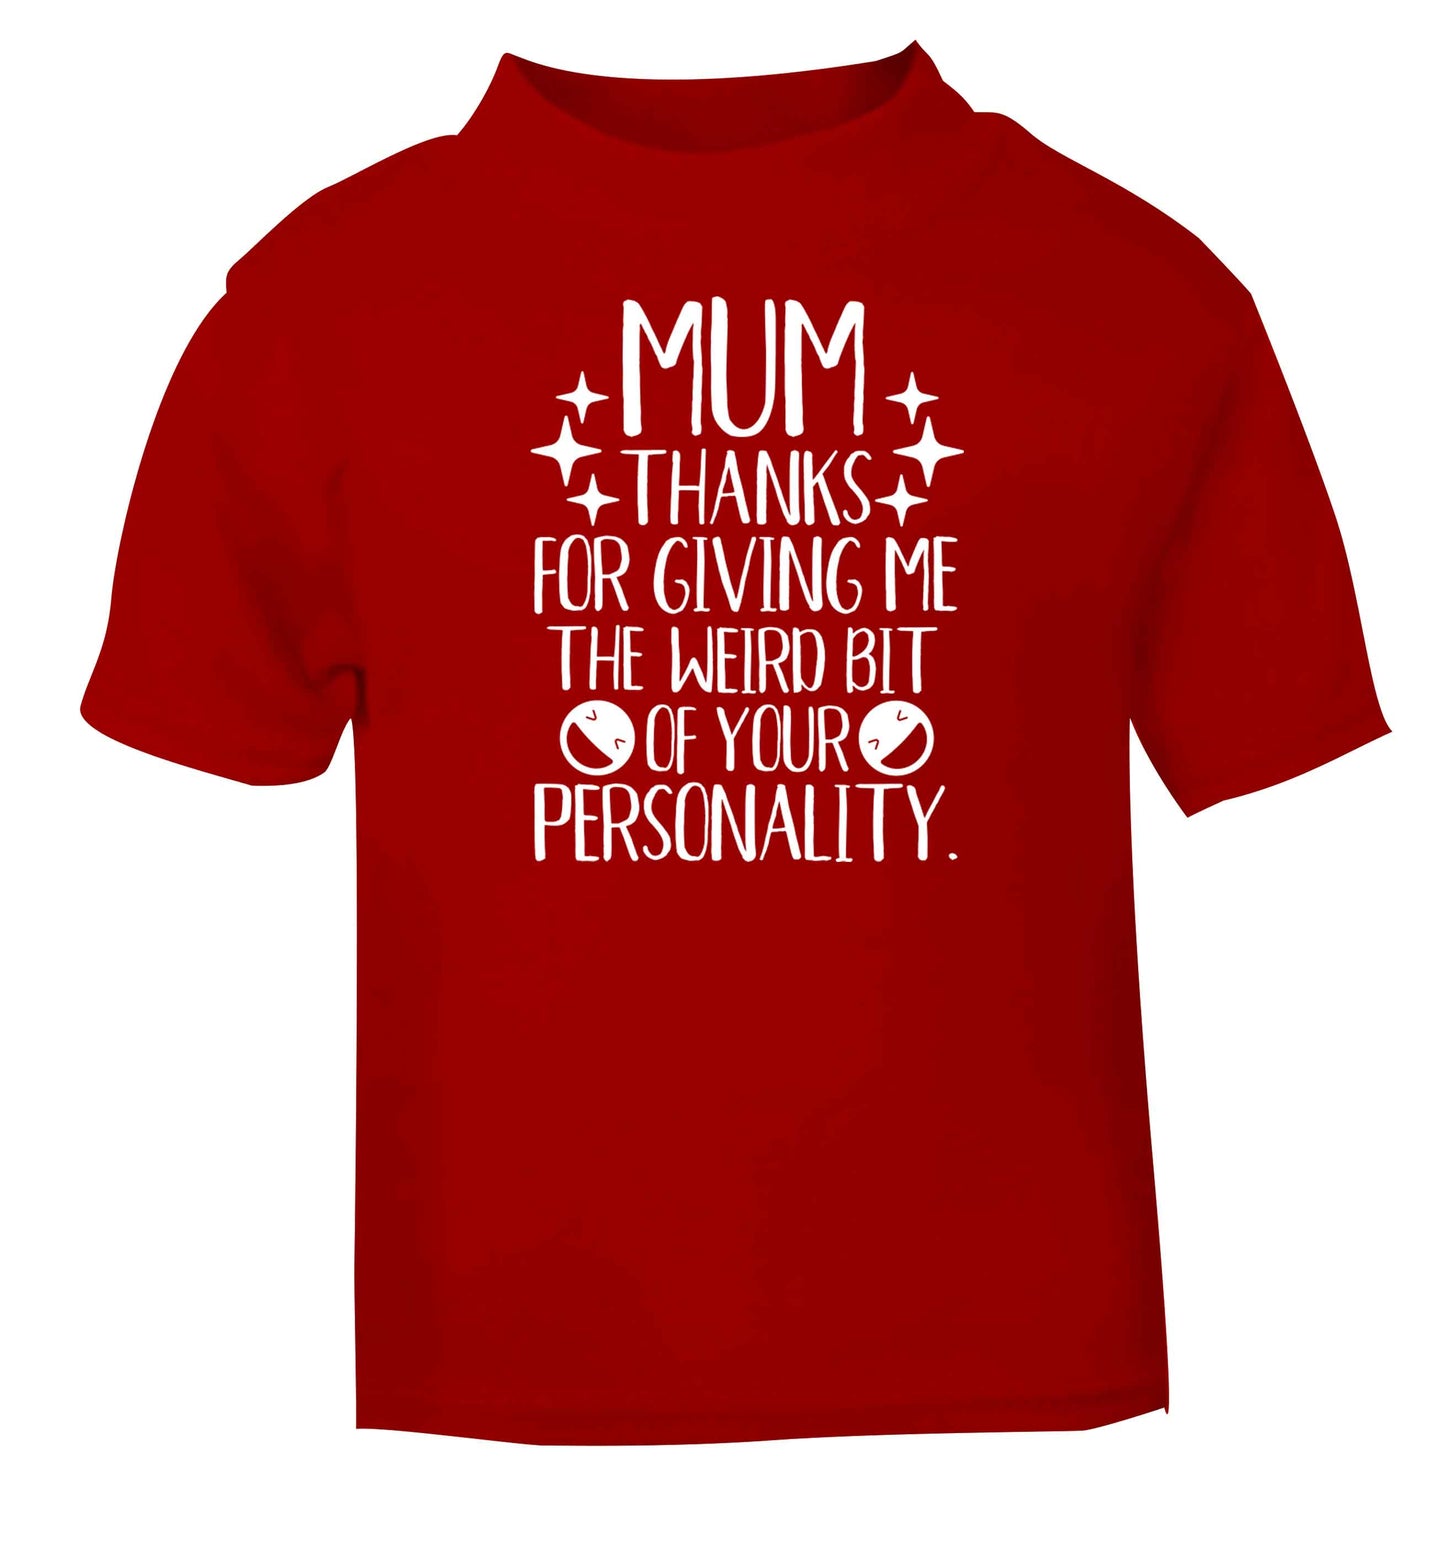 Mum, I love you more than halloumi and if you know me at all you know how deep that is red baby toddler Tshirt 2 Years